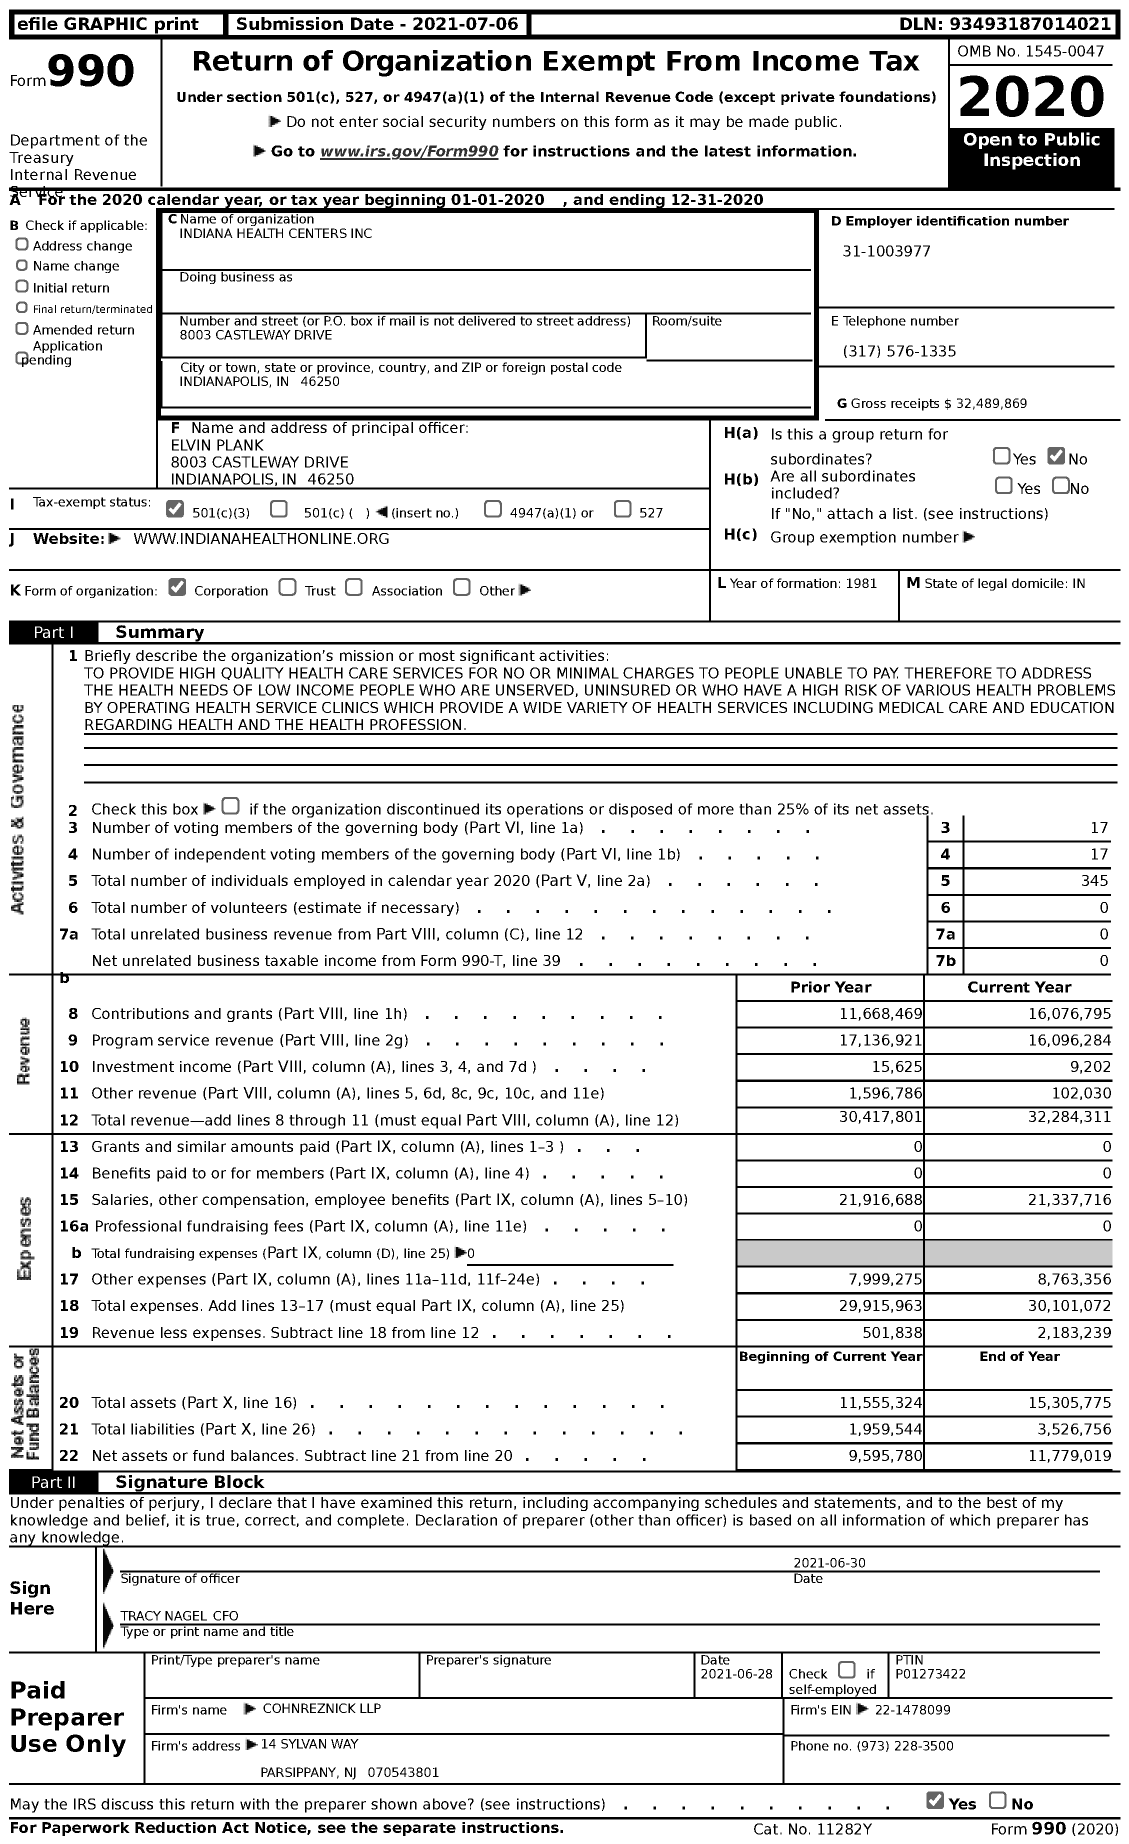 Image of first page of 2020 Form 990 for Indiana Health Centers (IHC)